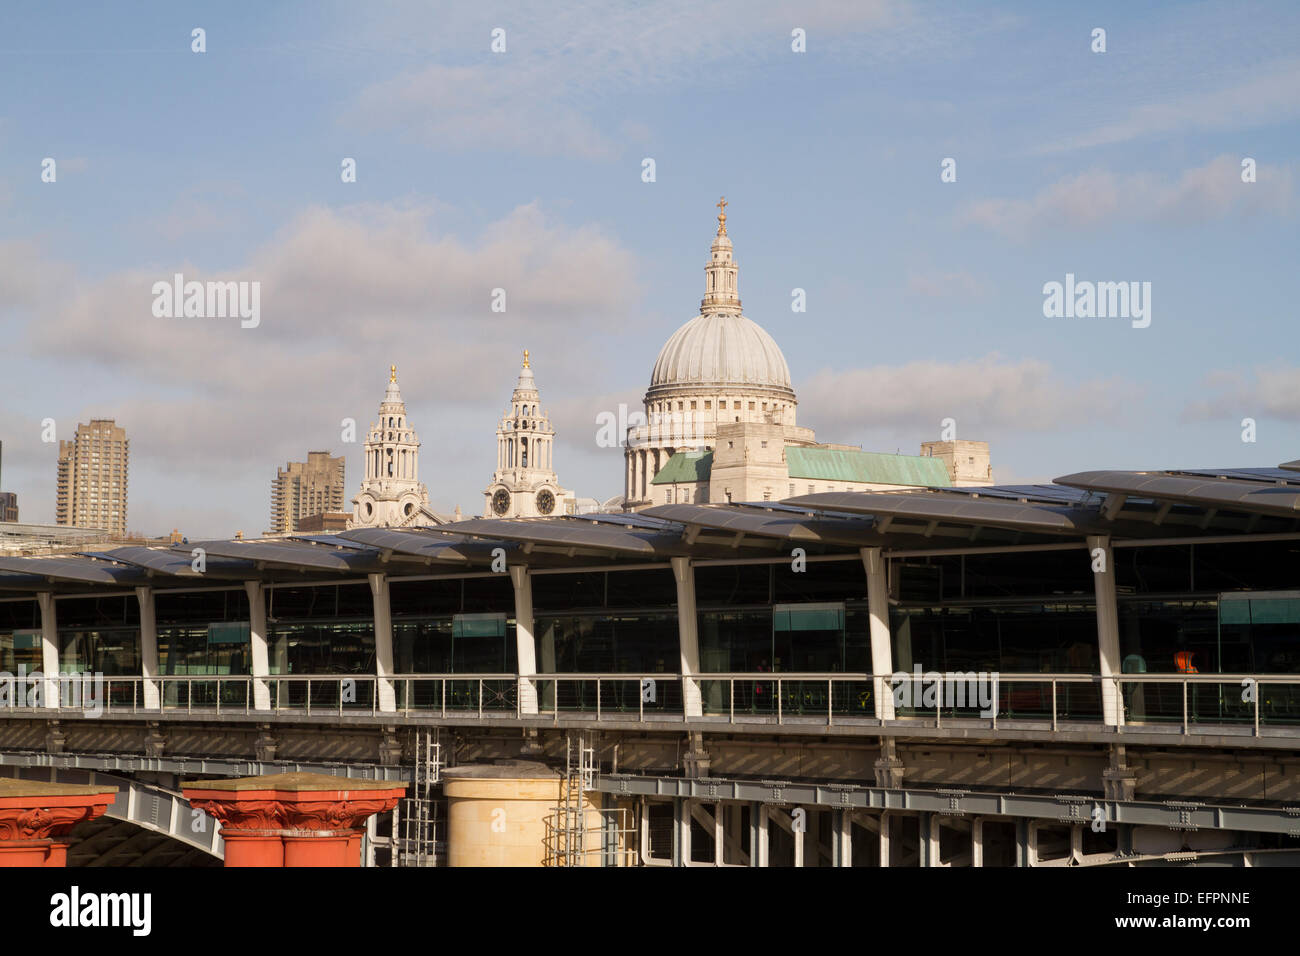 new Blackfriars railway bridge and station with St Paul's Cathedral in the background Stock Photo